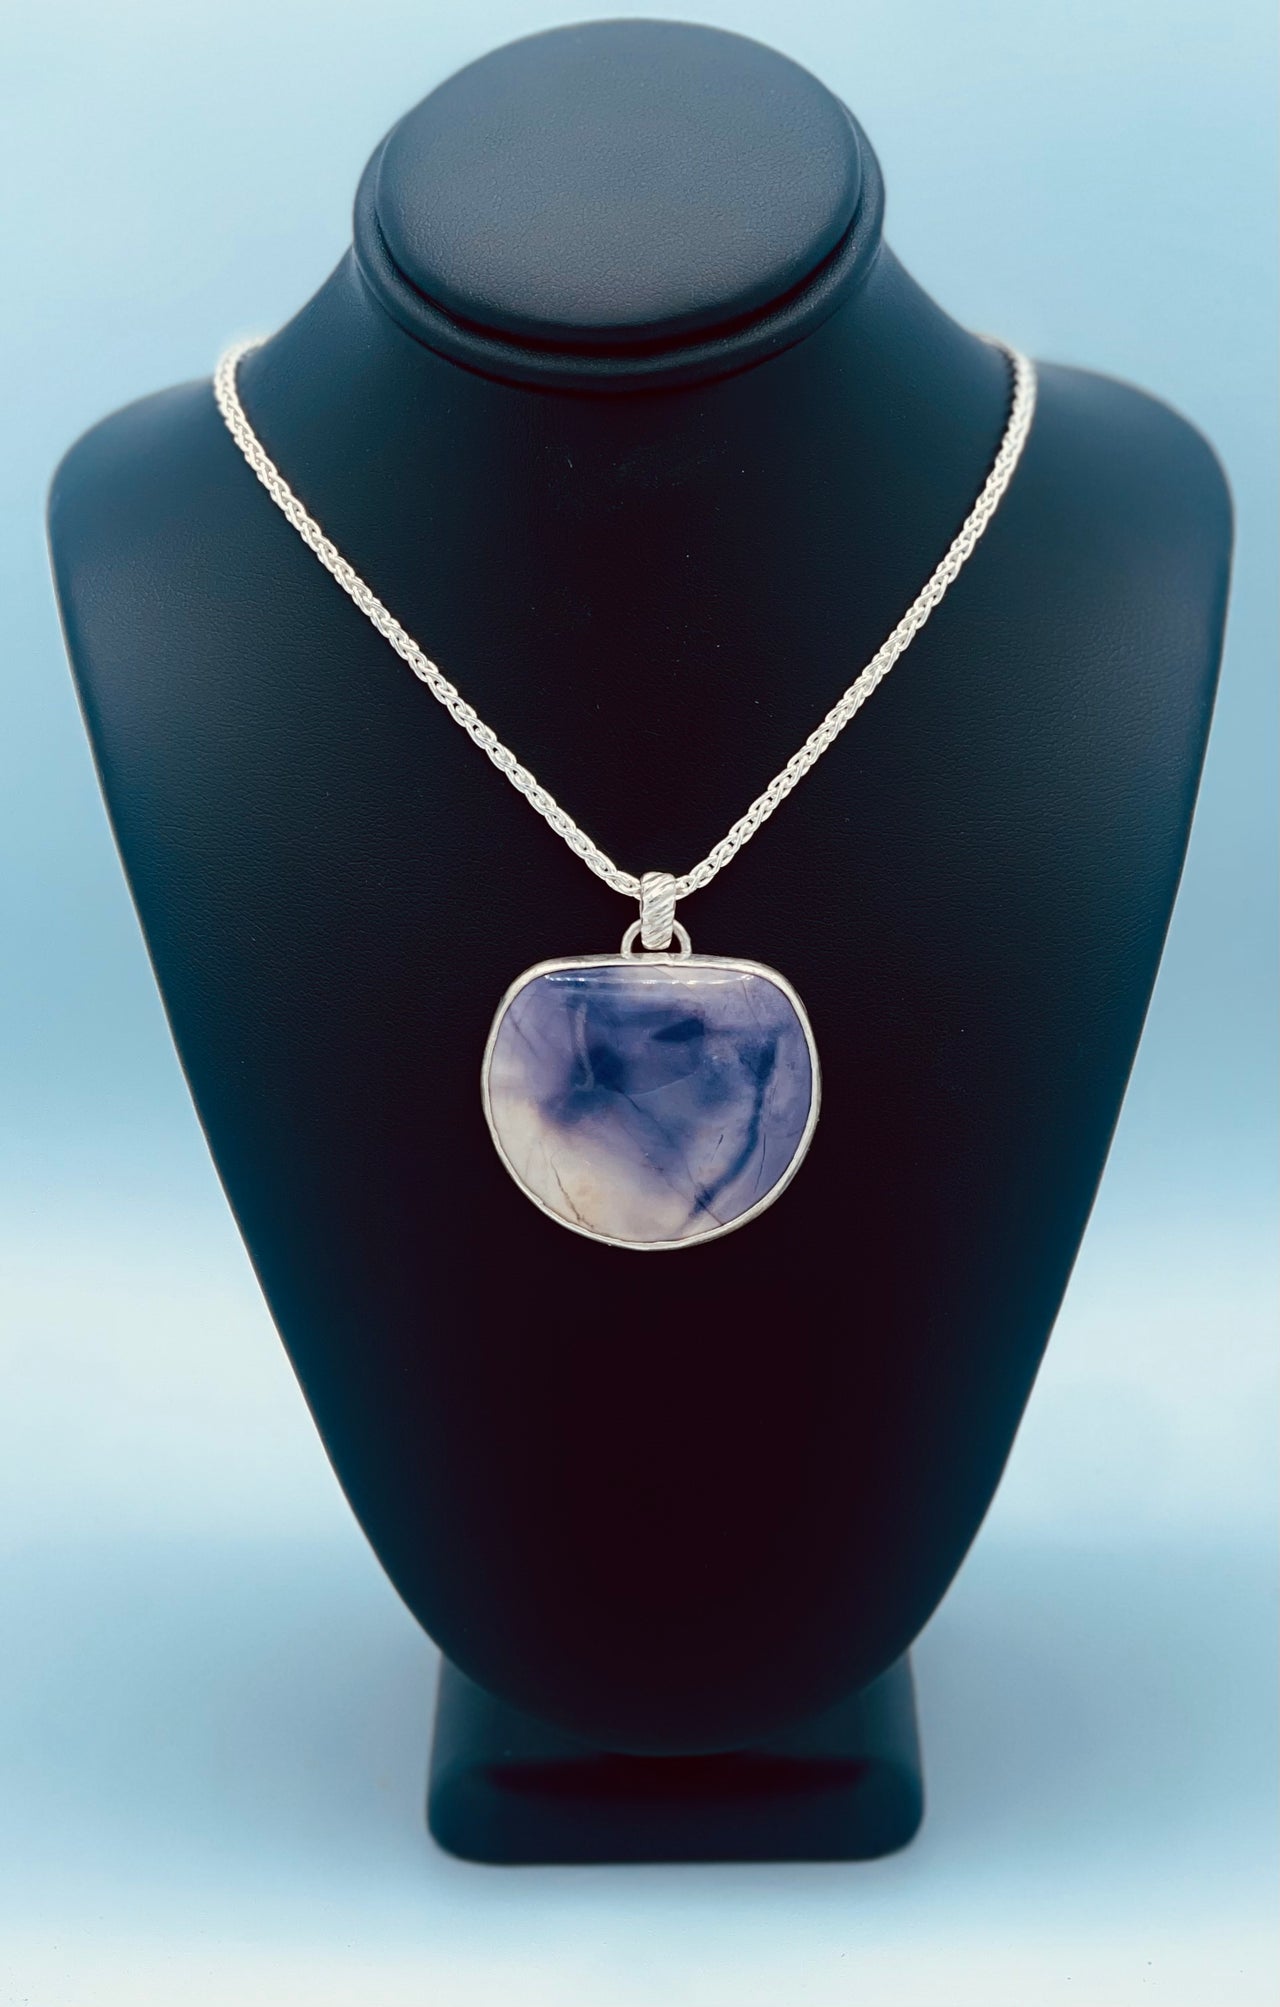 Submission Opens Doors (Tiffany Stone Pendant)